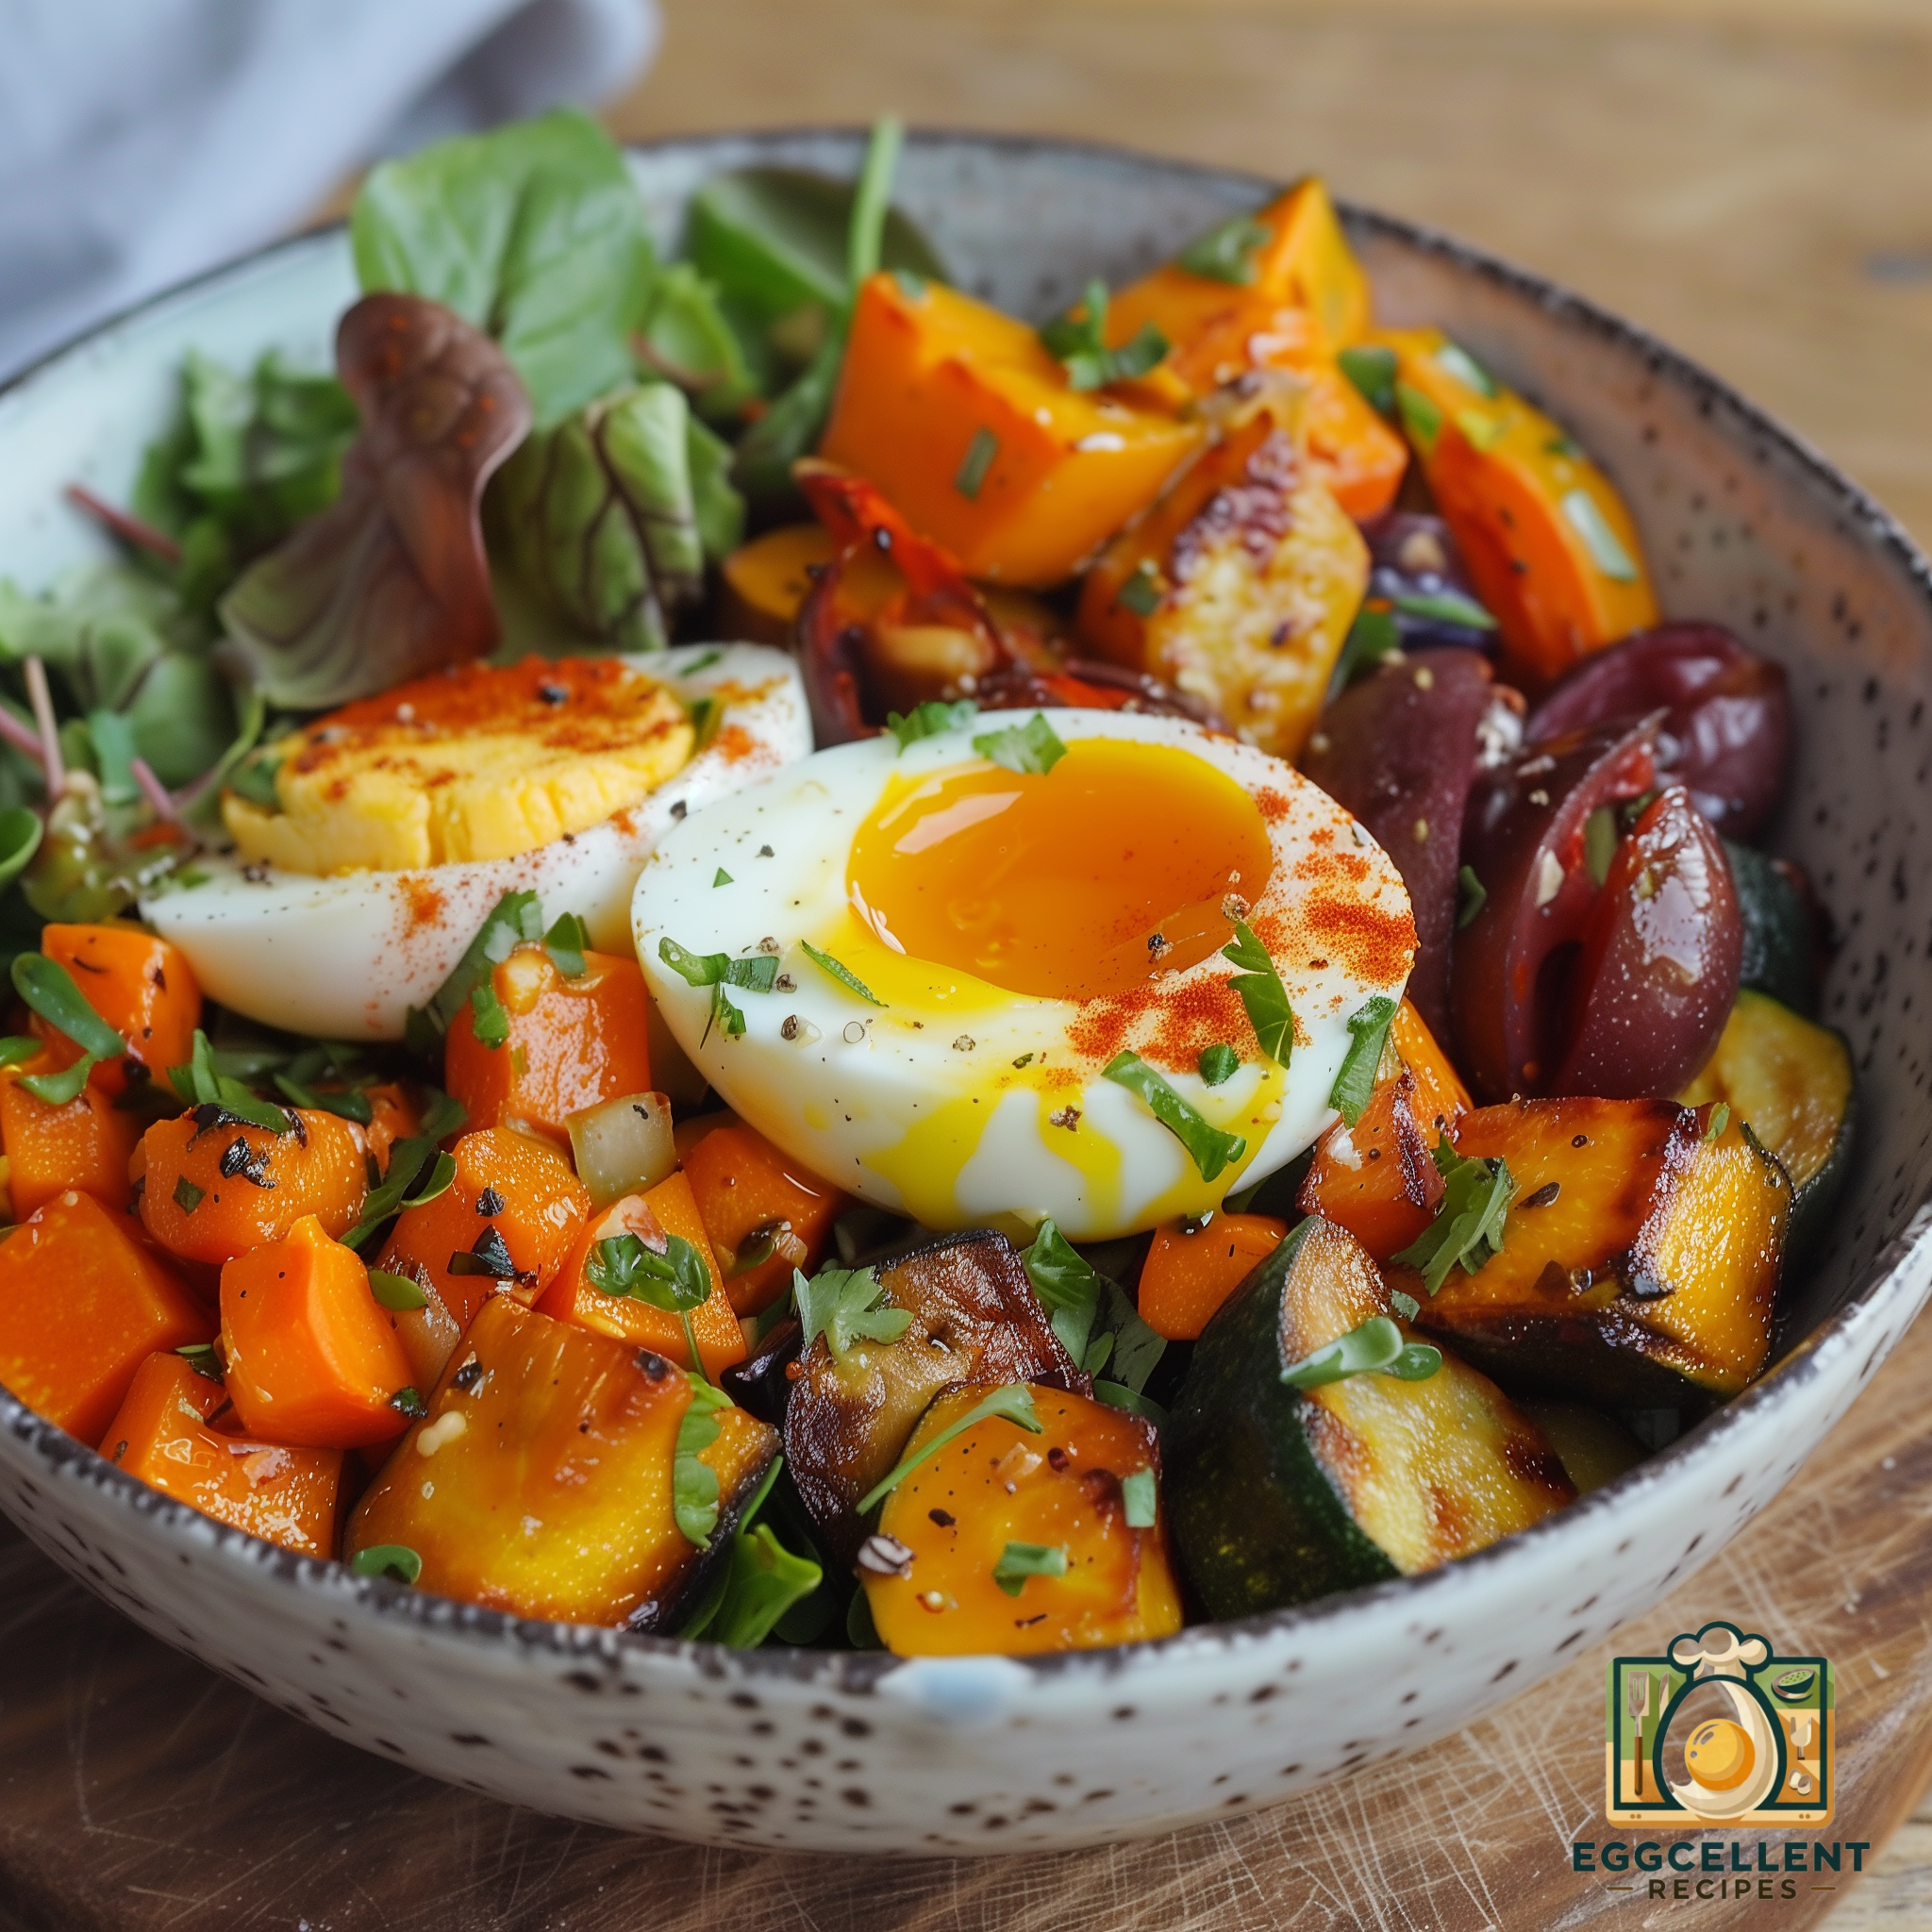 Roasted Vegetable Salad with Egg Recipe